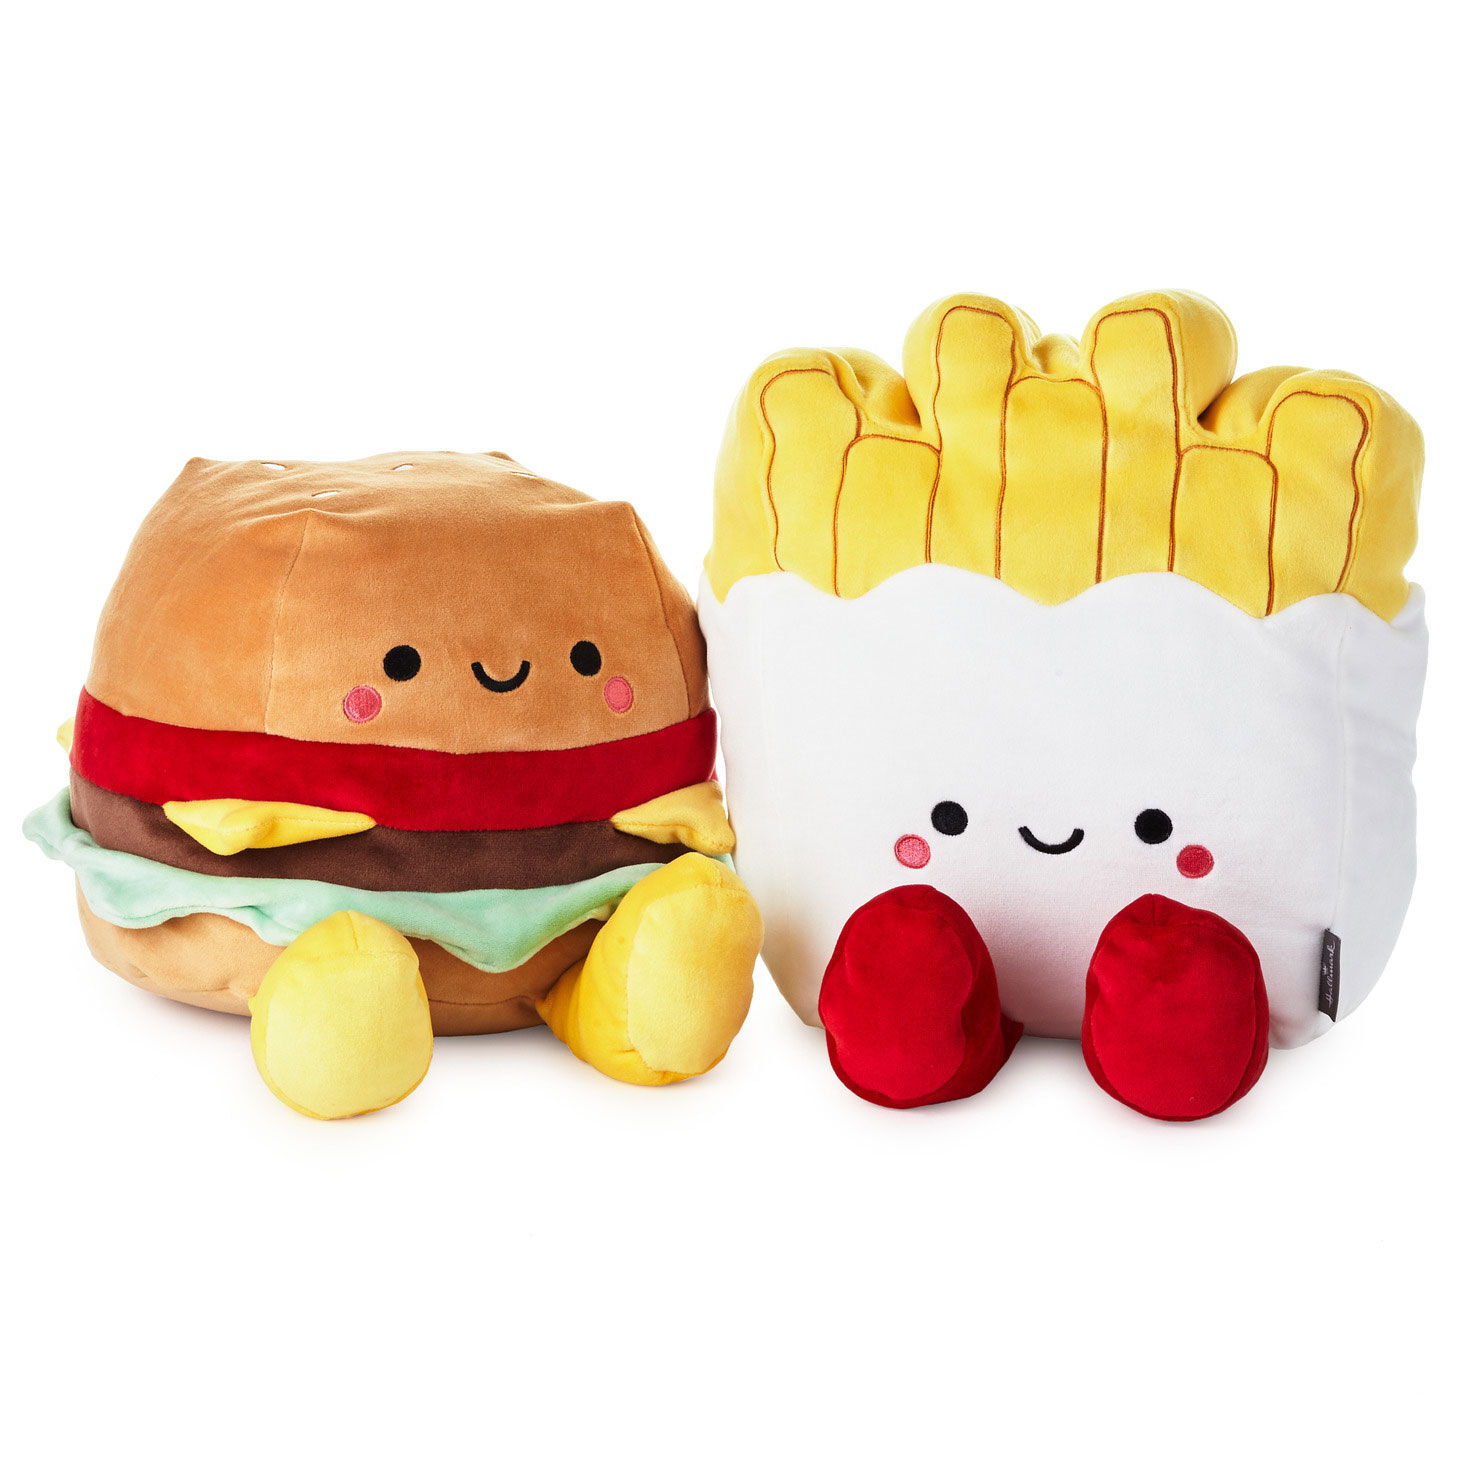 Large Better Together Burger and Fries Magnetic Plush, 10.25" for only USD 39.99 | Hallmark